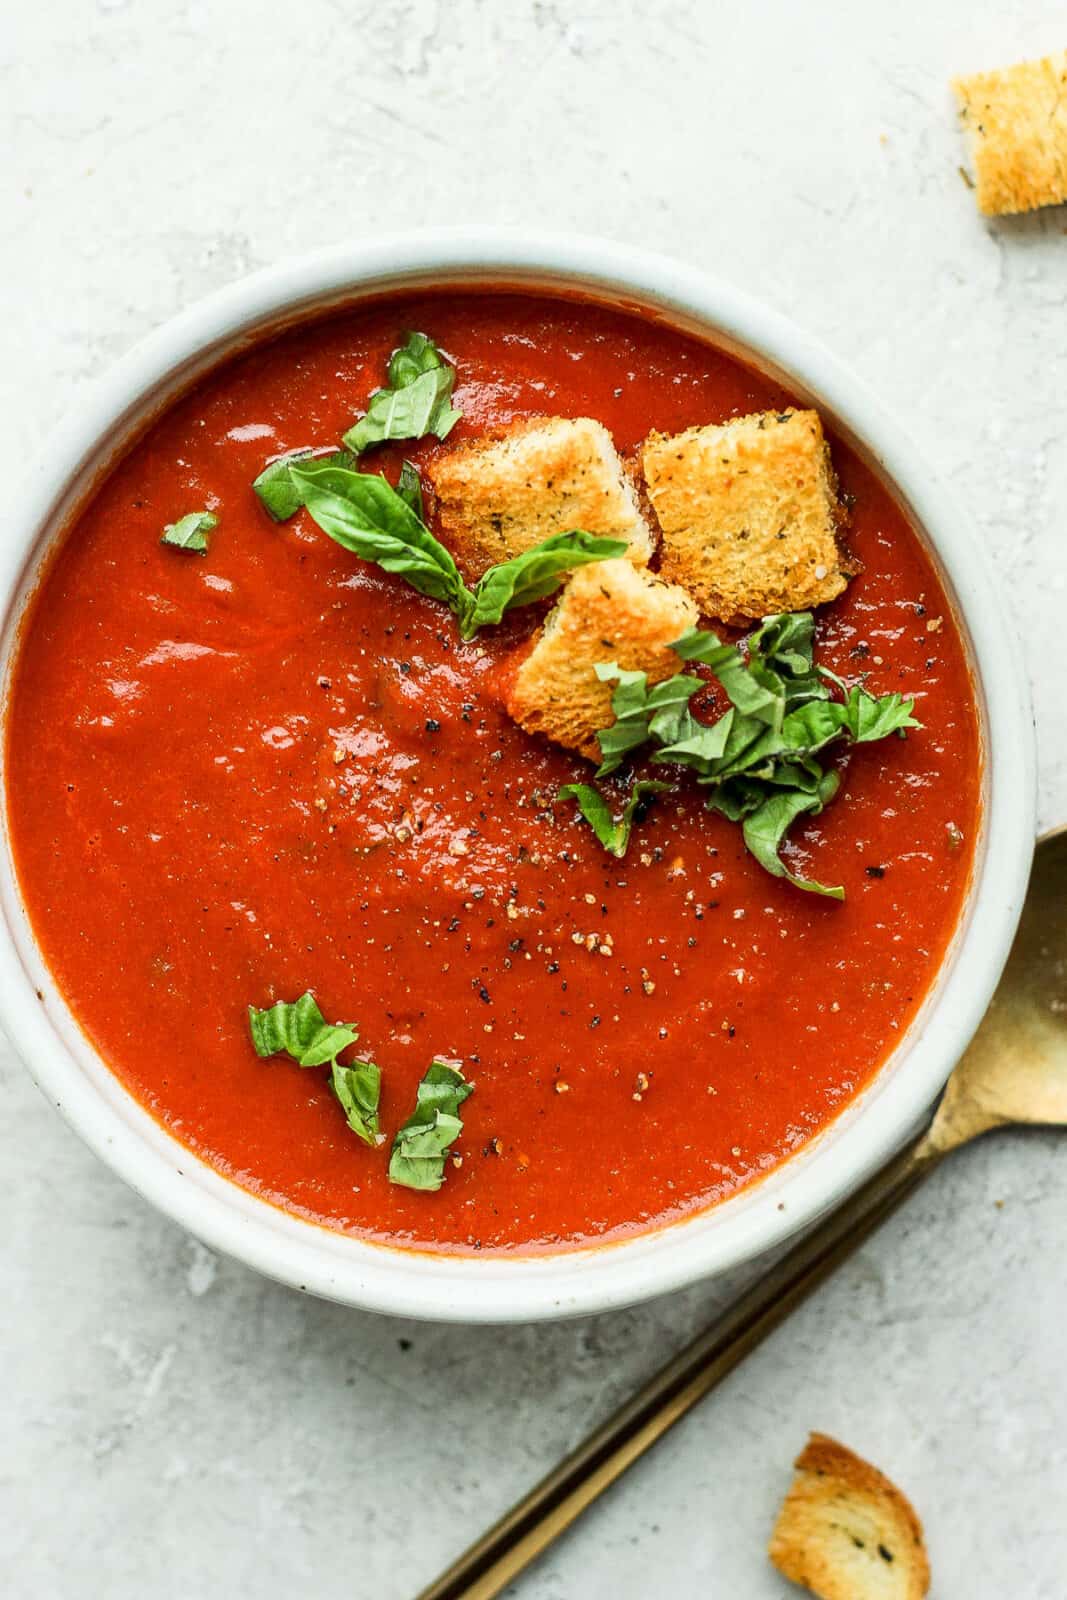 Homemade croutons on top of a bowl of tomato basil soup.